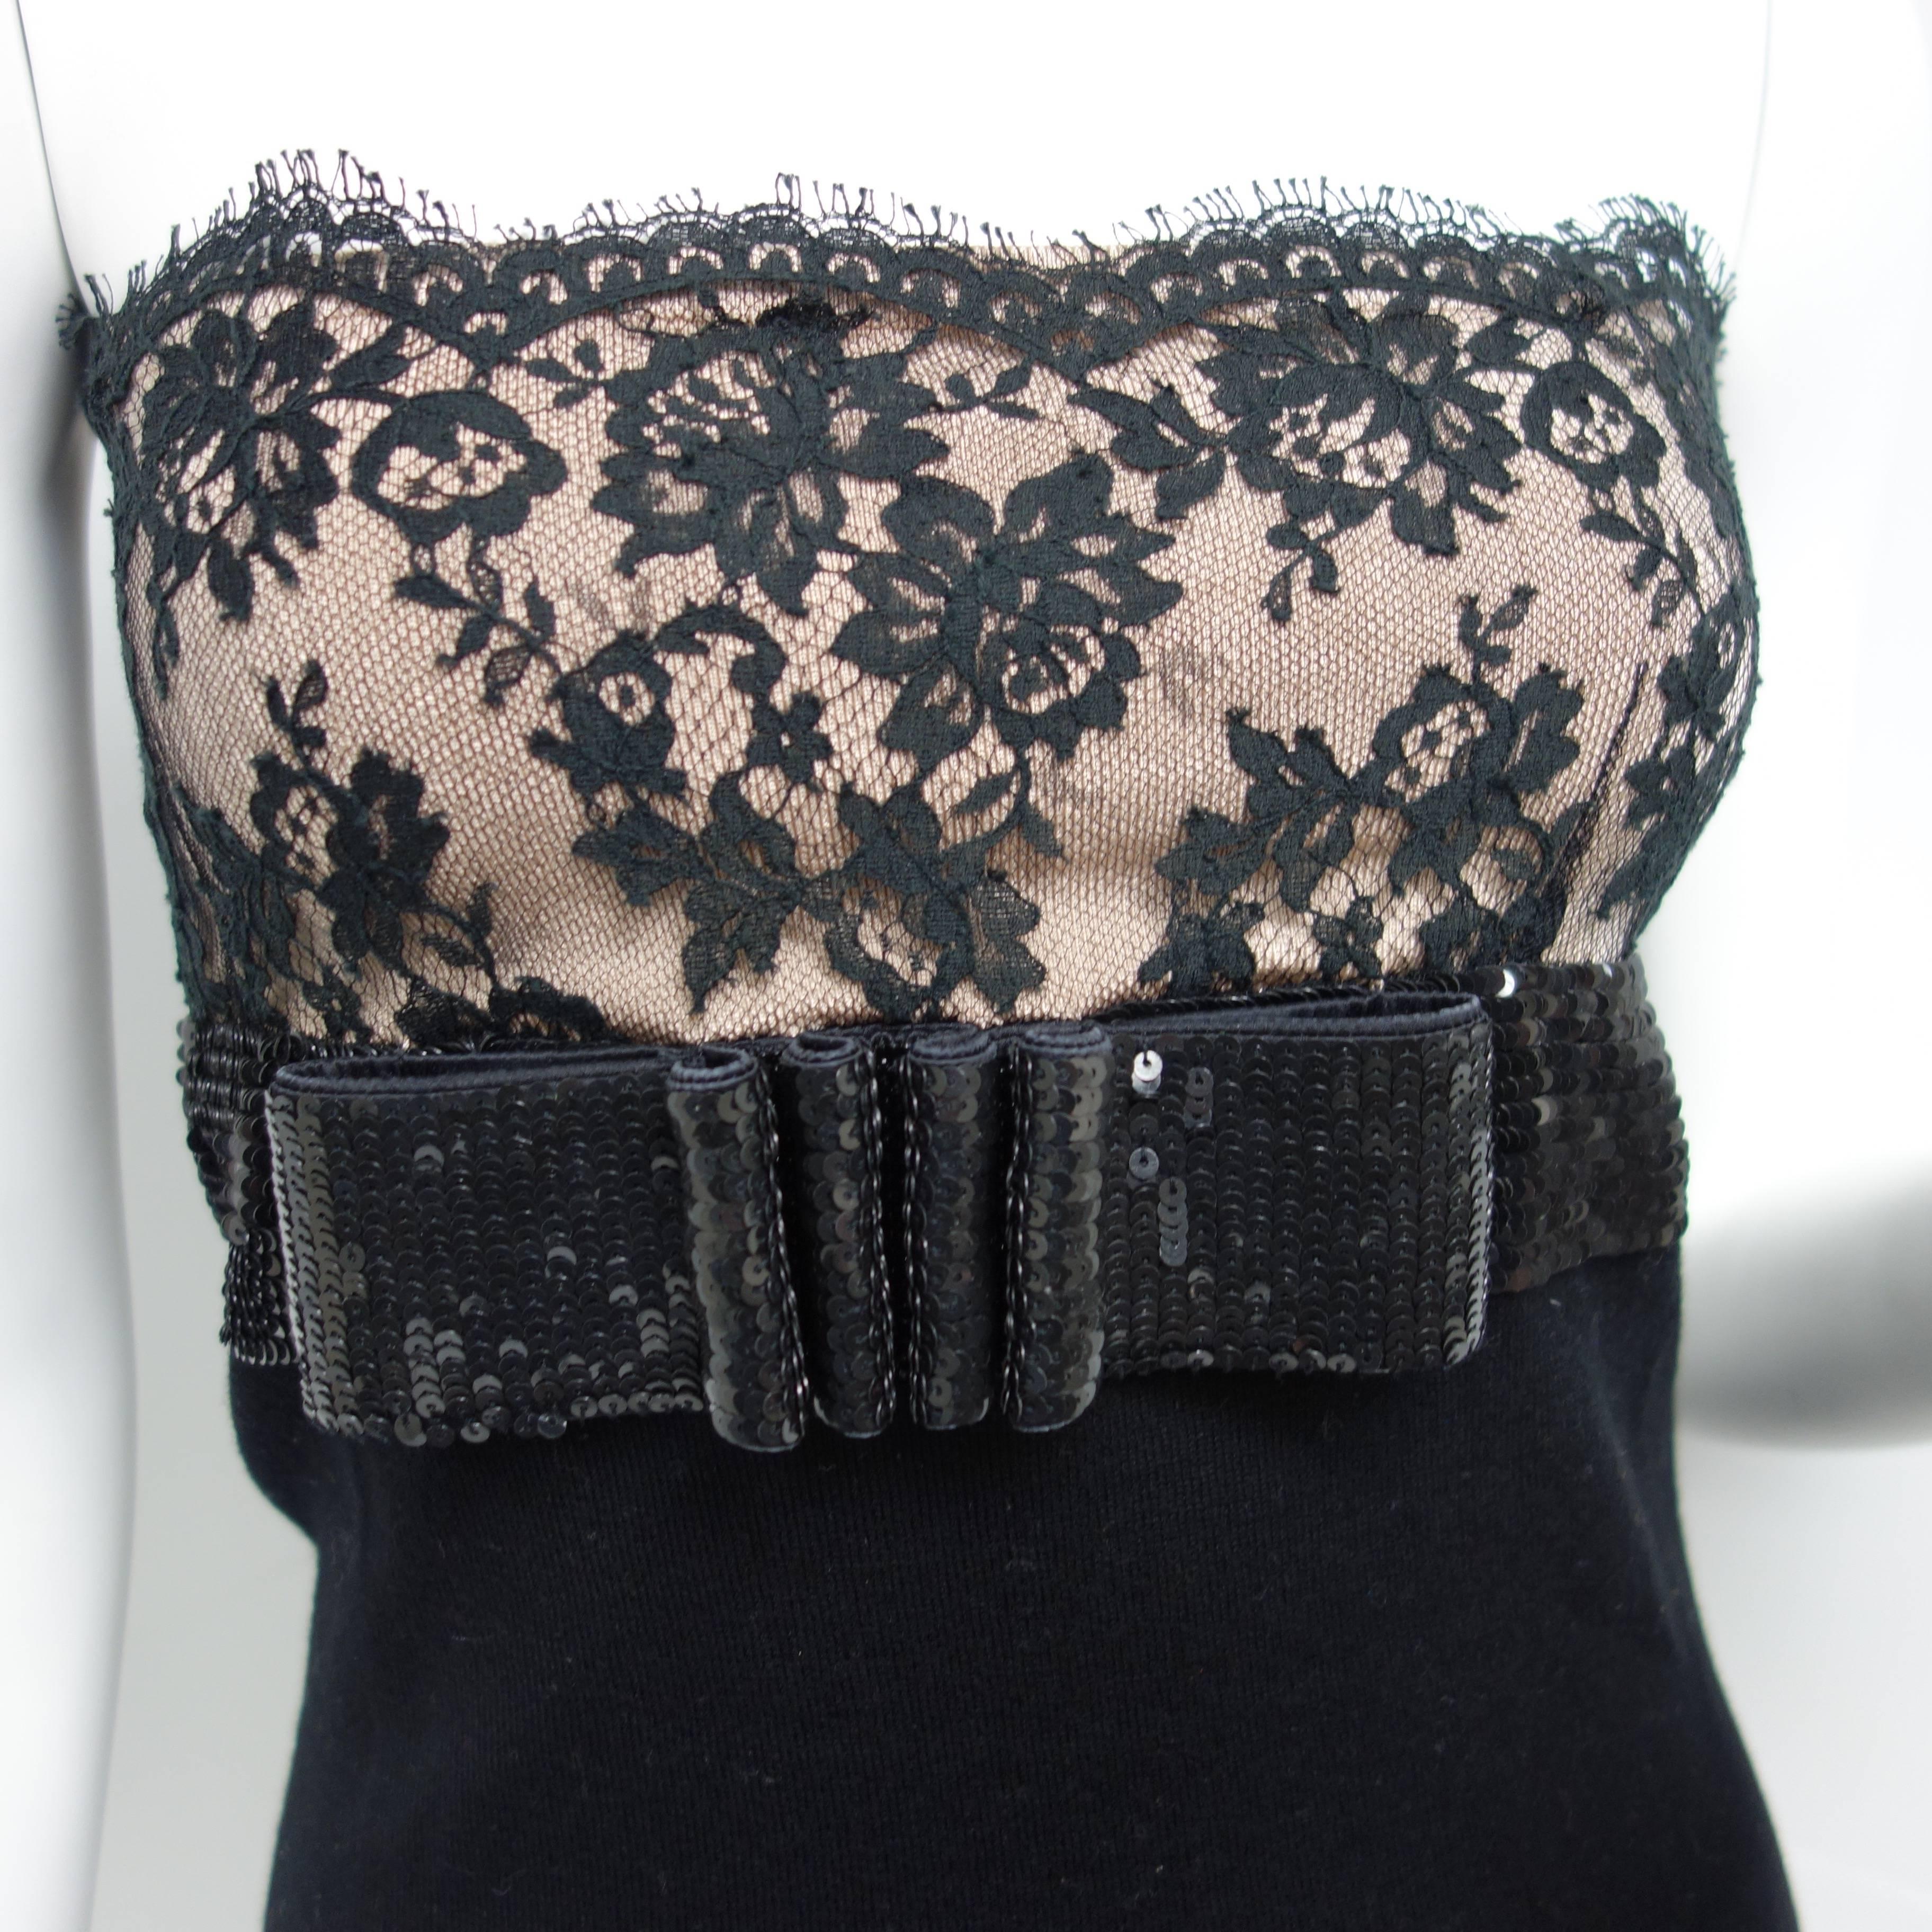 VALENTINO Strapless Top Exquisite Black Lace Over Nude Sequin Bow Front
The top golden nude color fabric is elastic and provide support to this exquisite piece. 
Hidden full zipper on left side.
Material:
Bottom part black fabric is 100% fleece